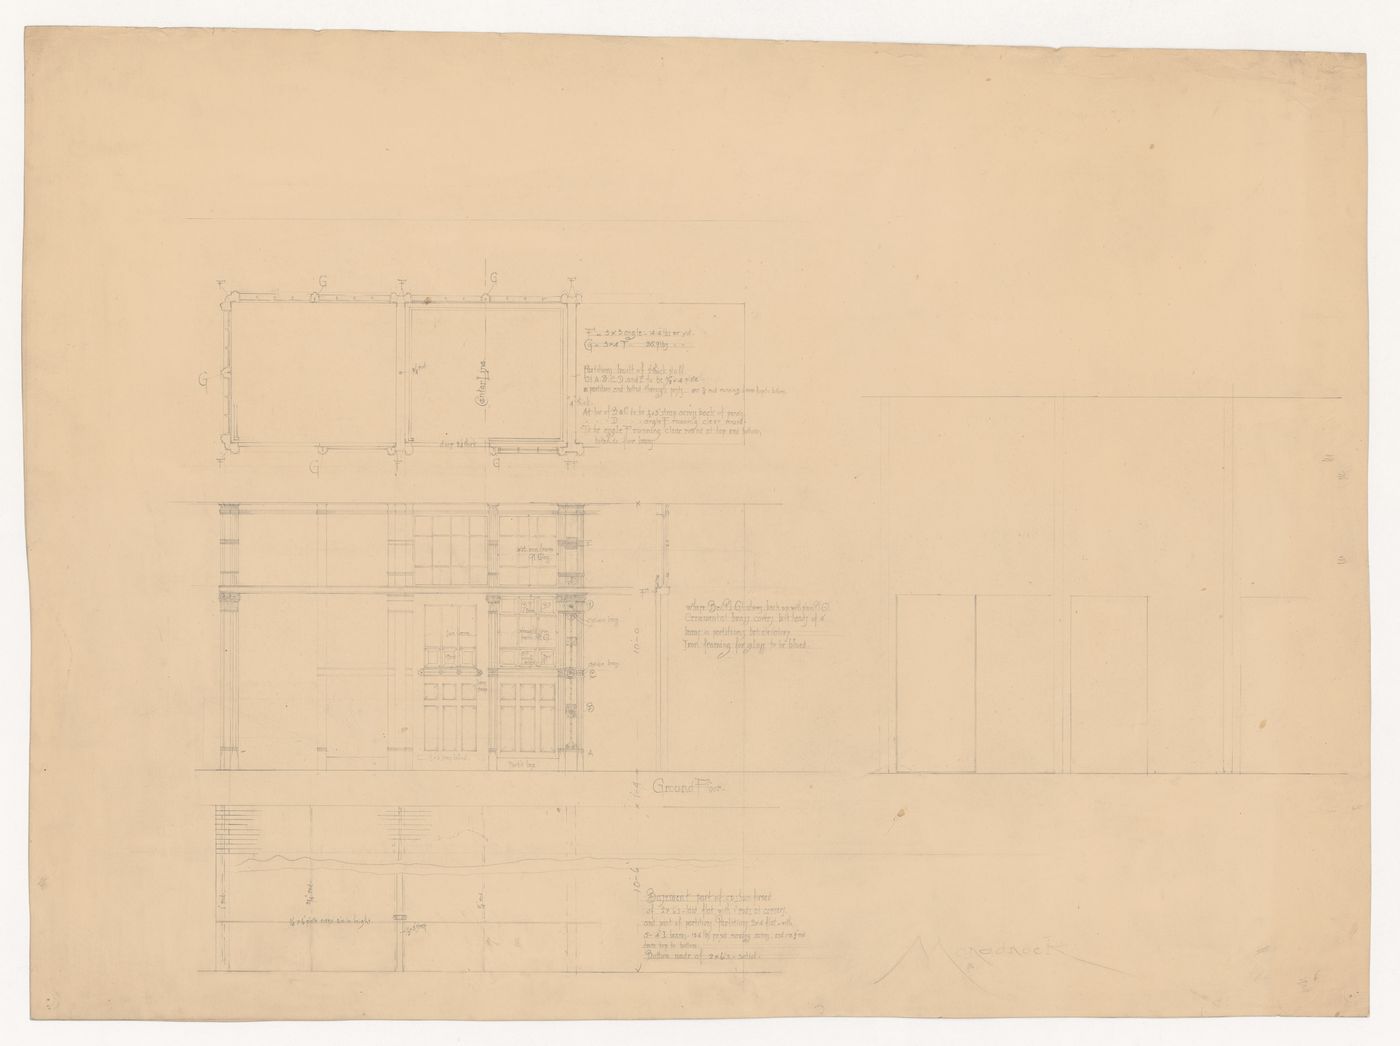 Monadnock Building, Chicago: Sectional elevation, plan and wall section for elevator shaft enclosure and doors